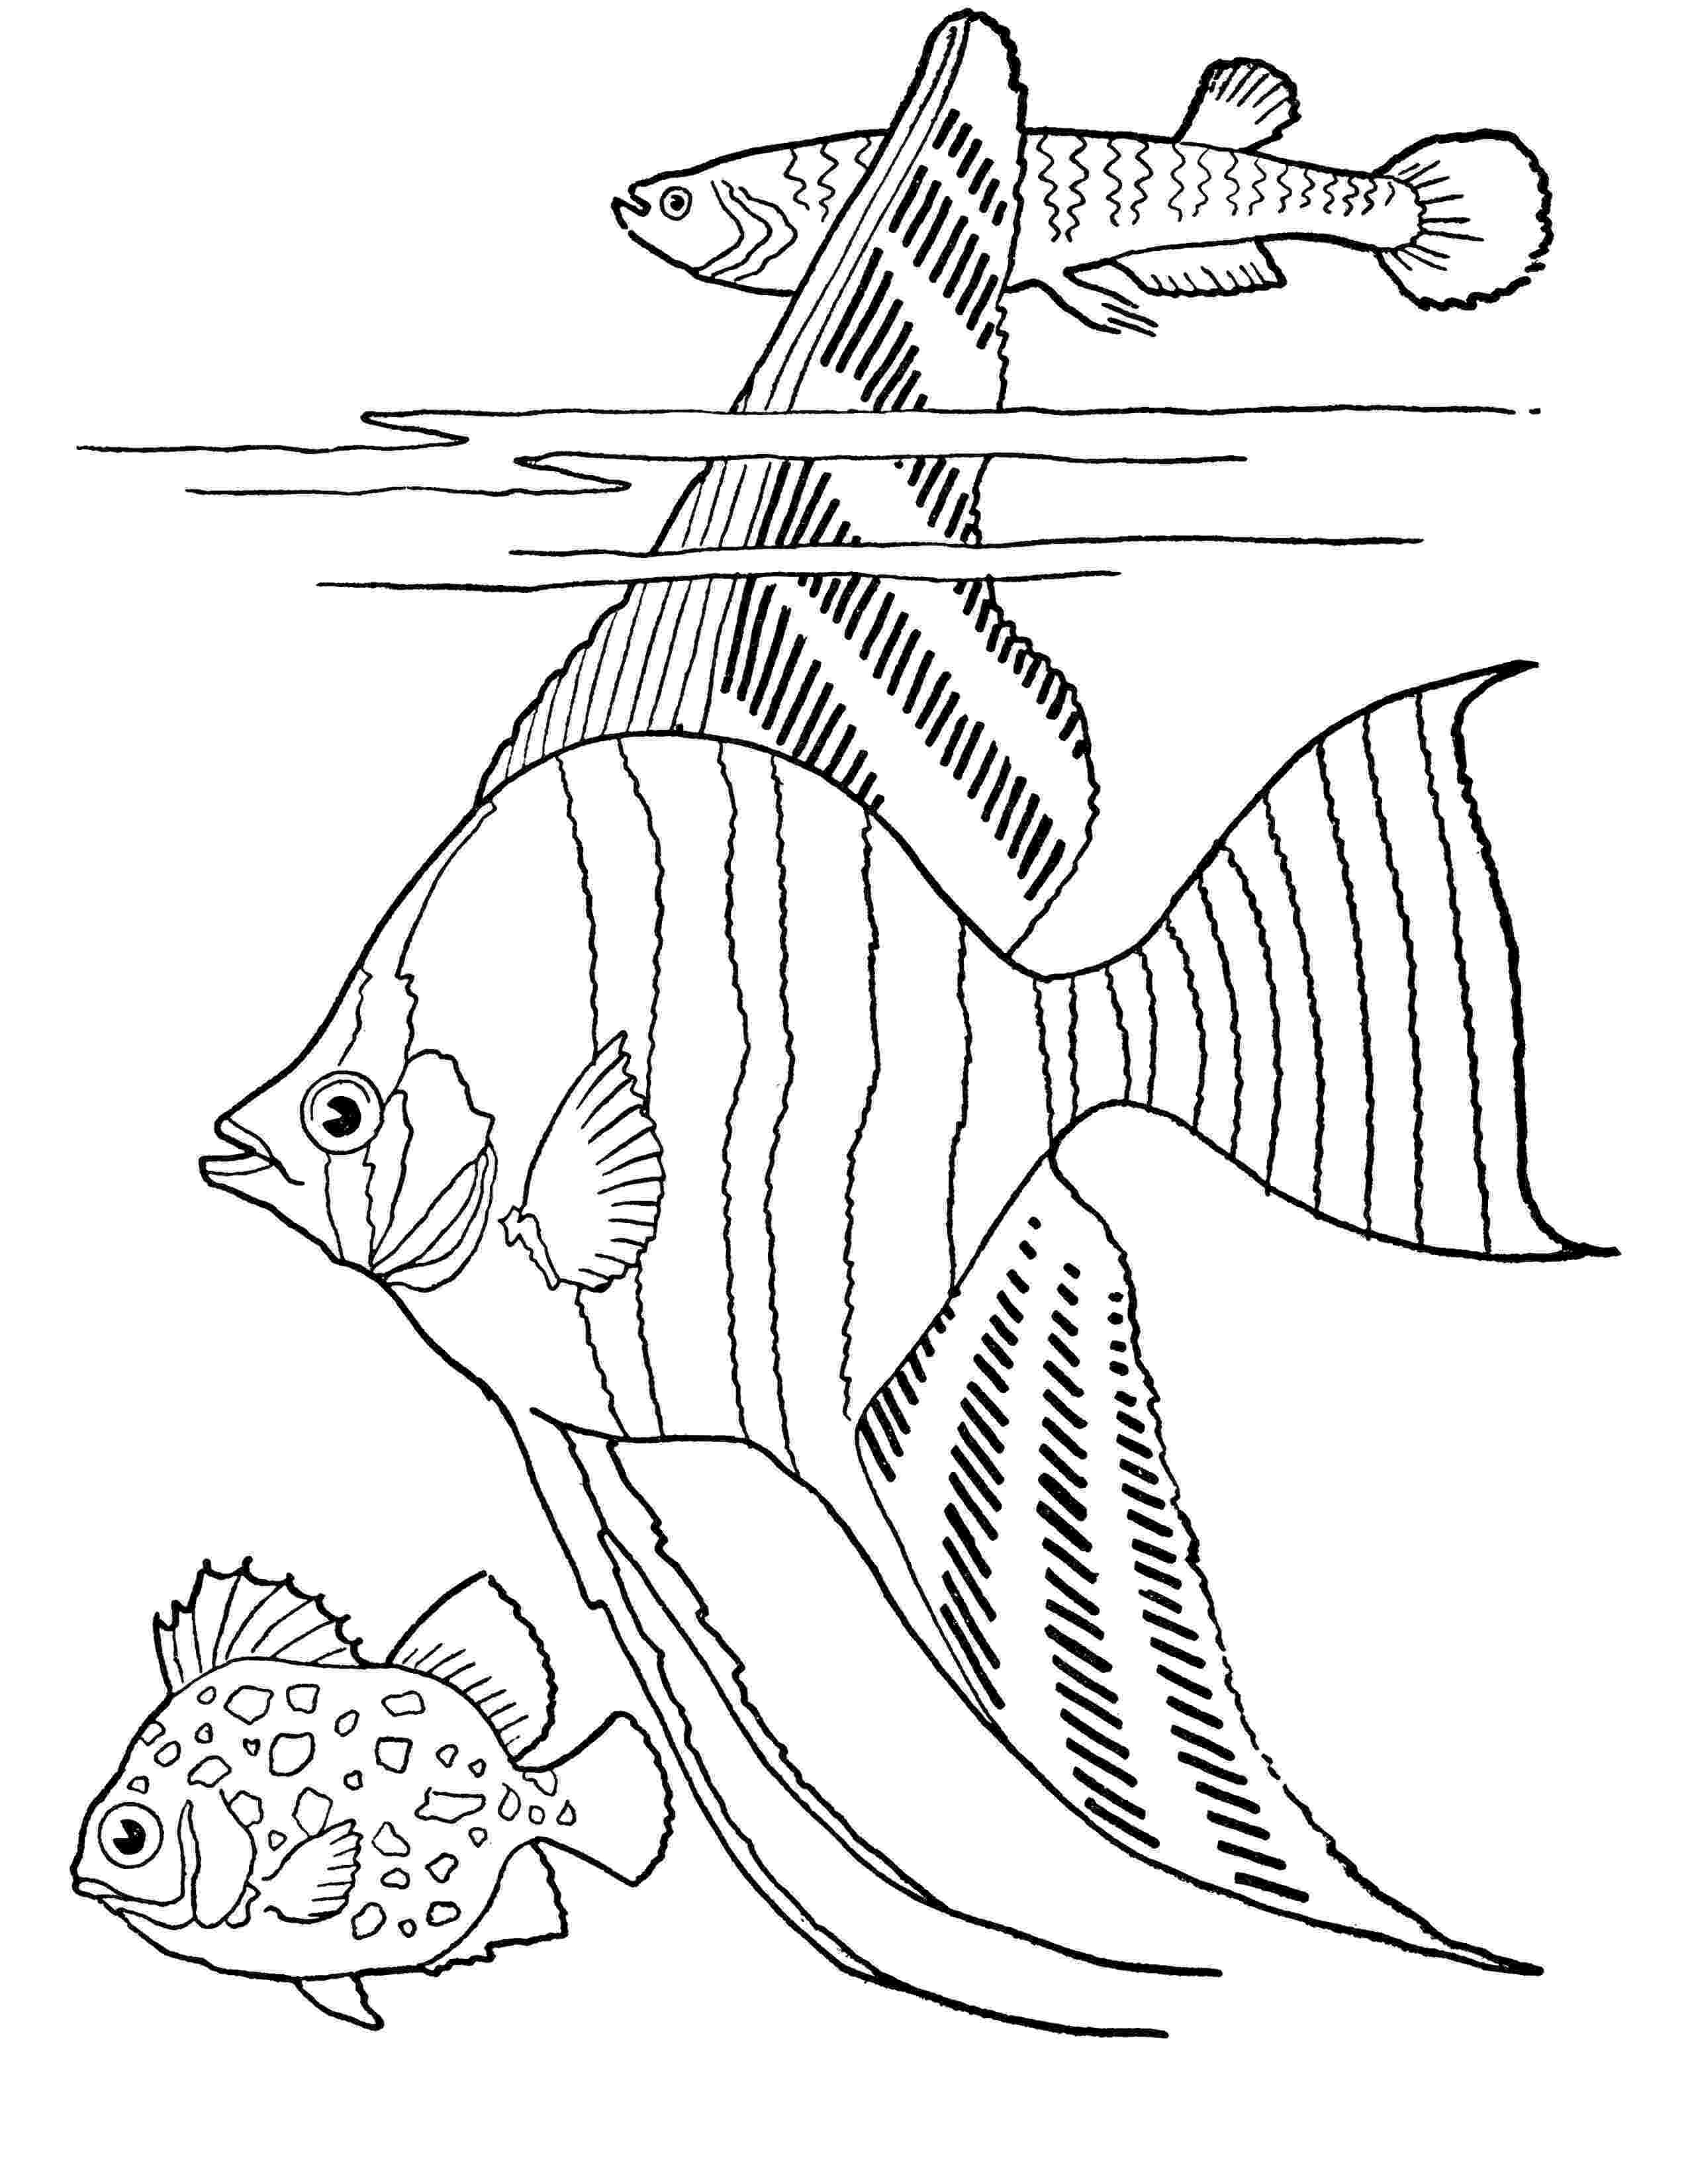 fish coloring pages for adults print download cute and educative fish coloring pages coloring pages fish for adults 